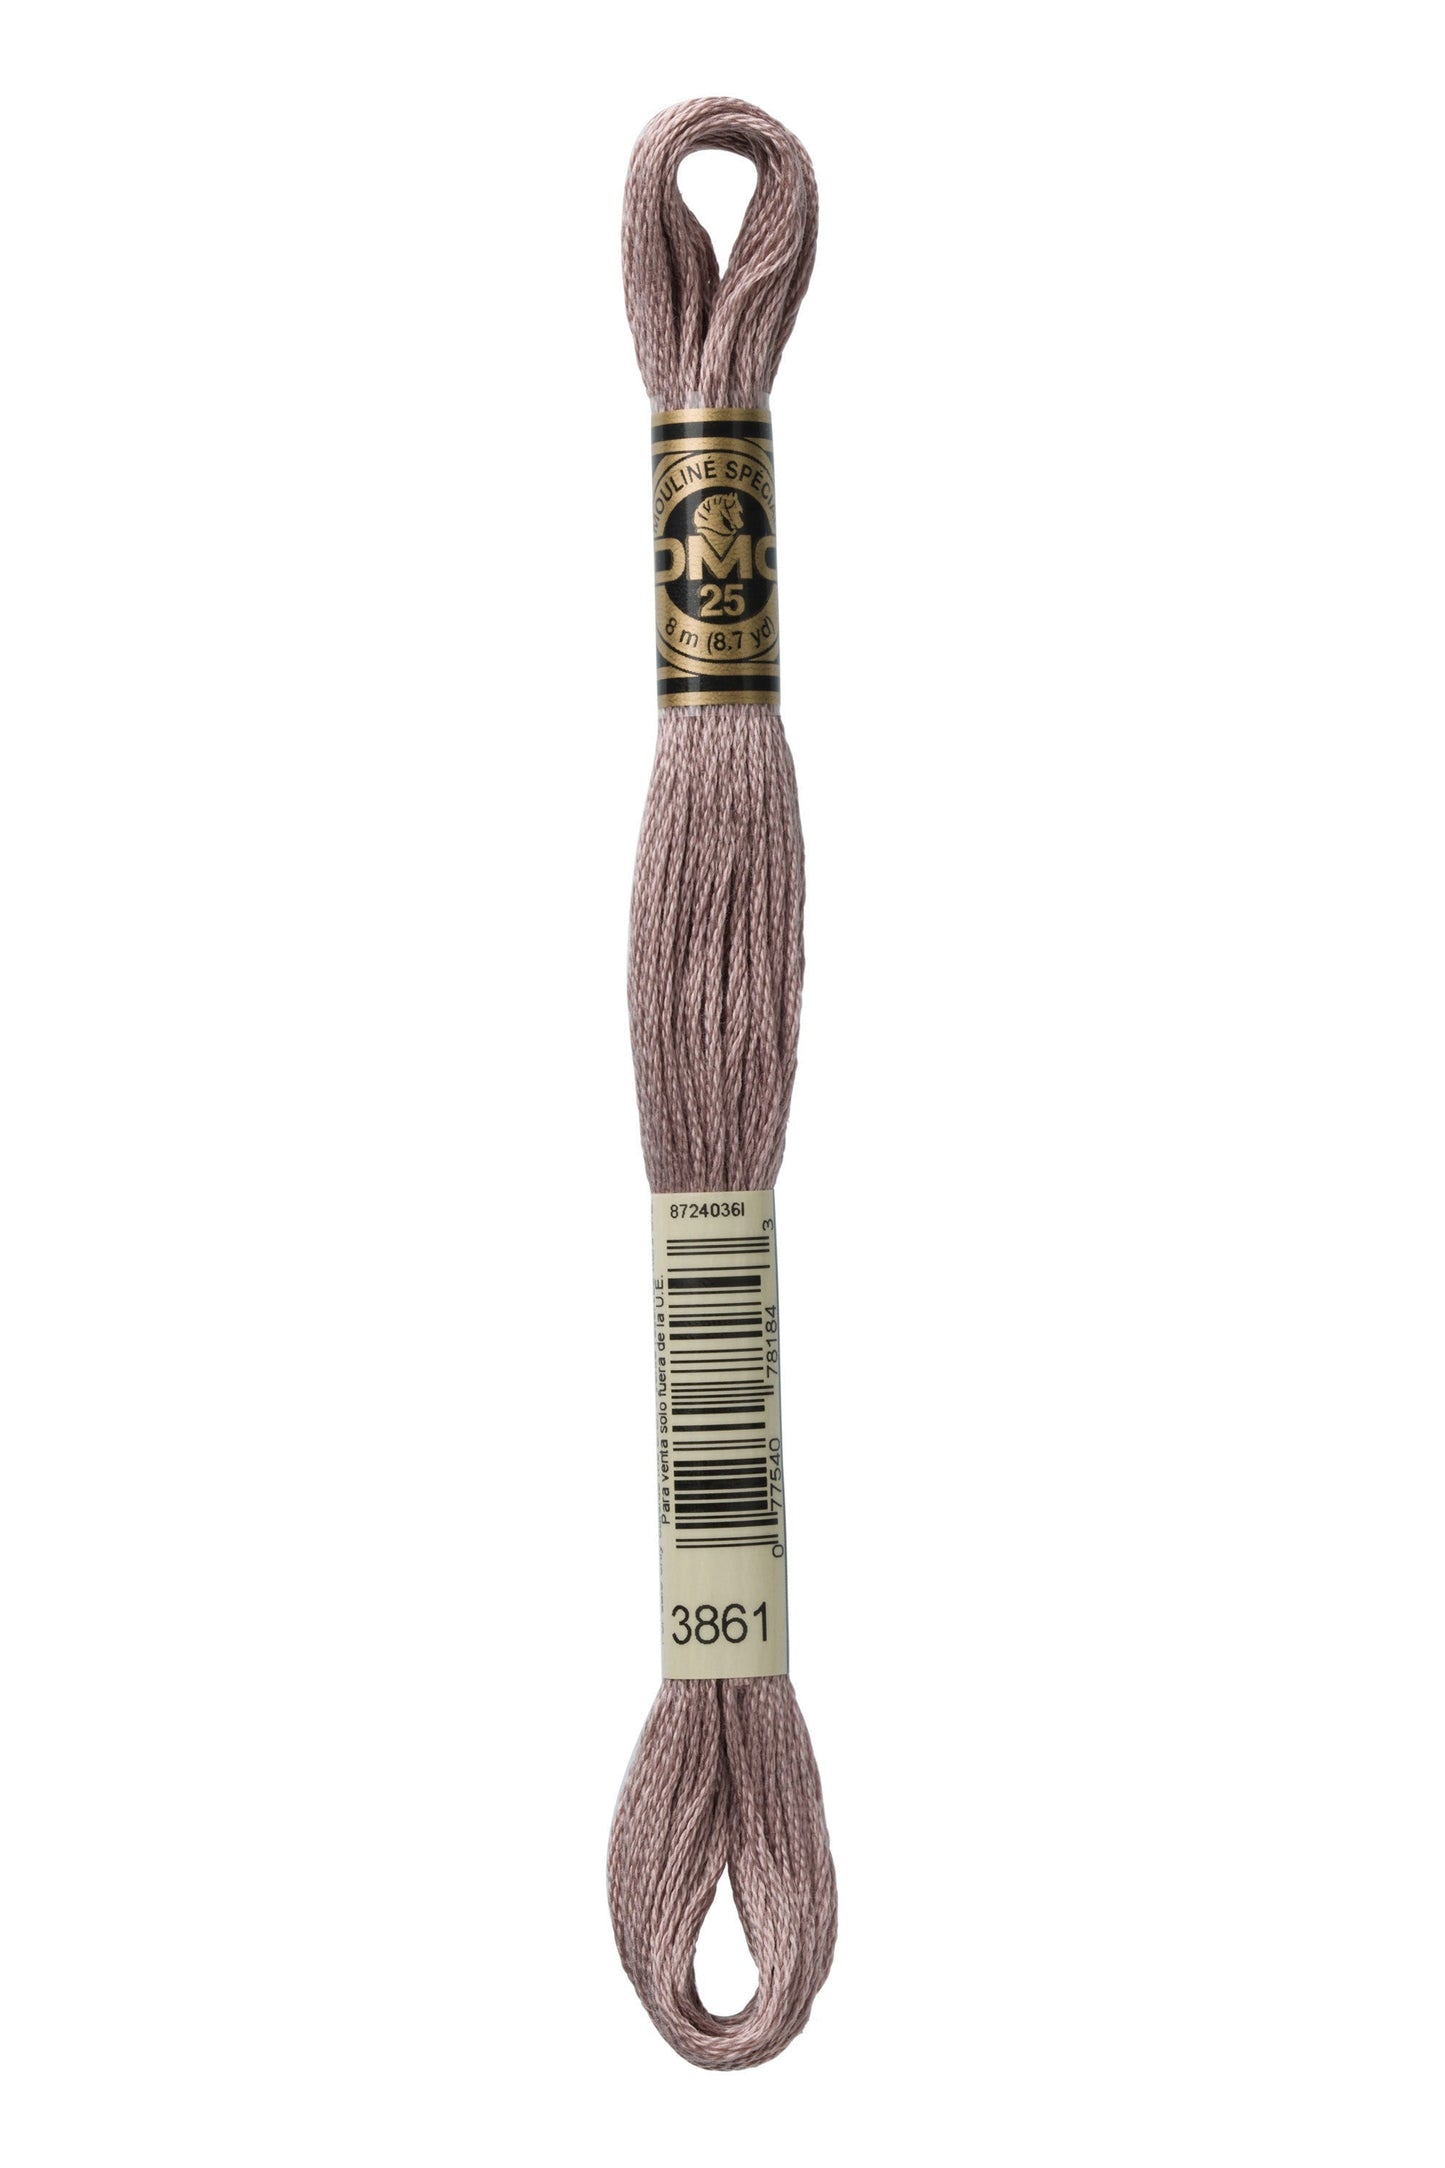 Six-Strand Embroidery Floss - 3861 (Light Taupe)-Embroidery Thread-Wild and Woolly Yarns